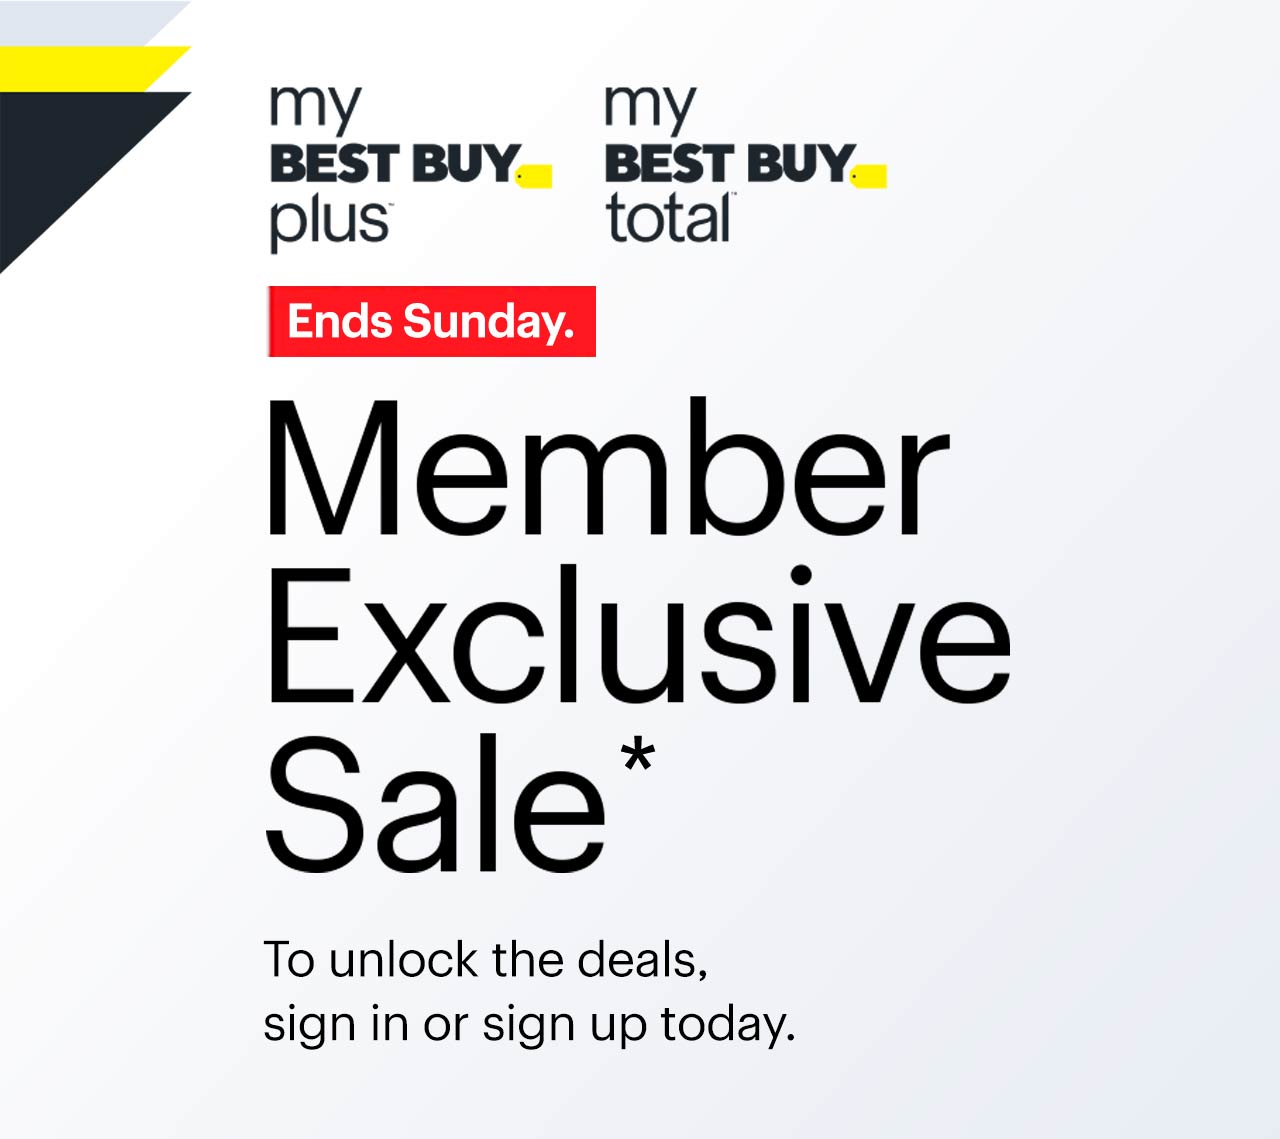 My Best Buy Plus and My Best Buy Total Member Exclusive Sale. Ends Sunday. To unlock the deals, sign in or sign up today. Reference disclaimer.